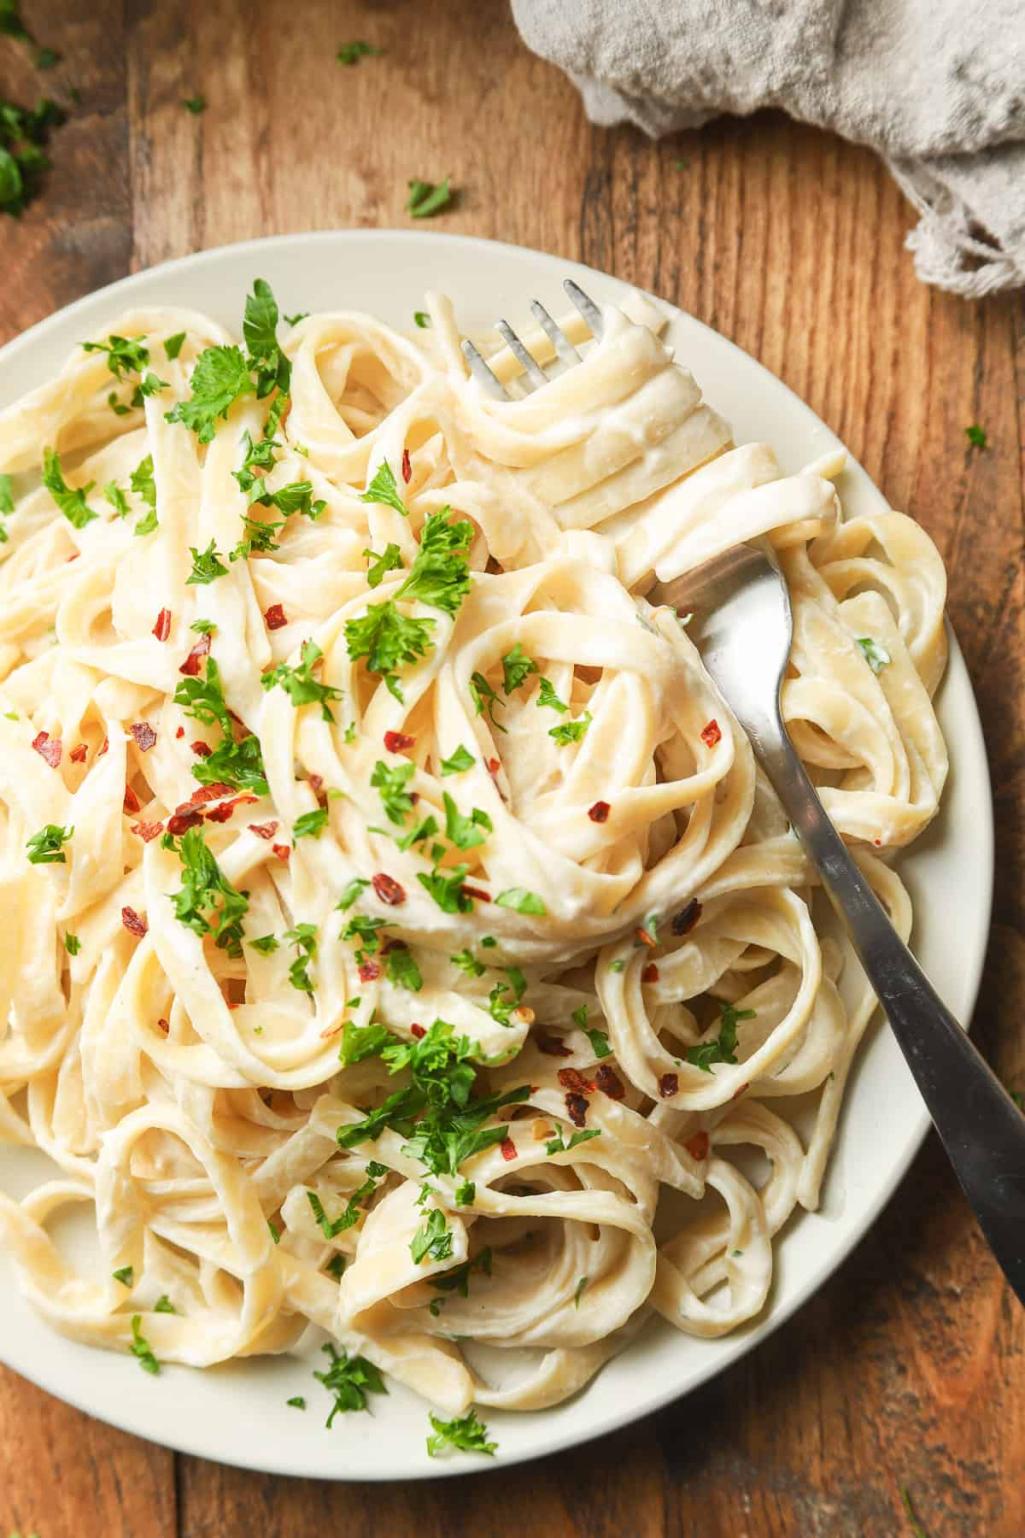 What Are Some Tips for Cooking Fettuccine Perfectly?